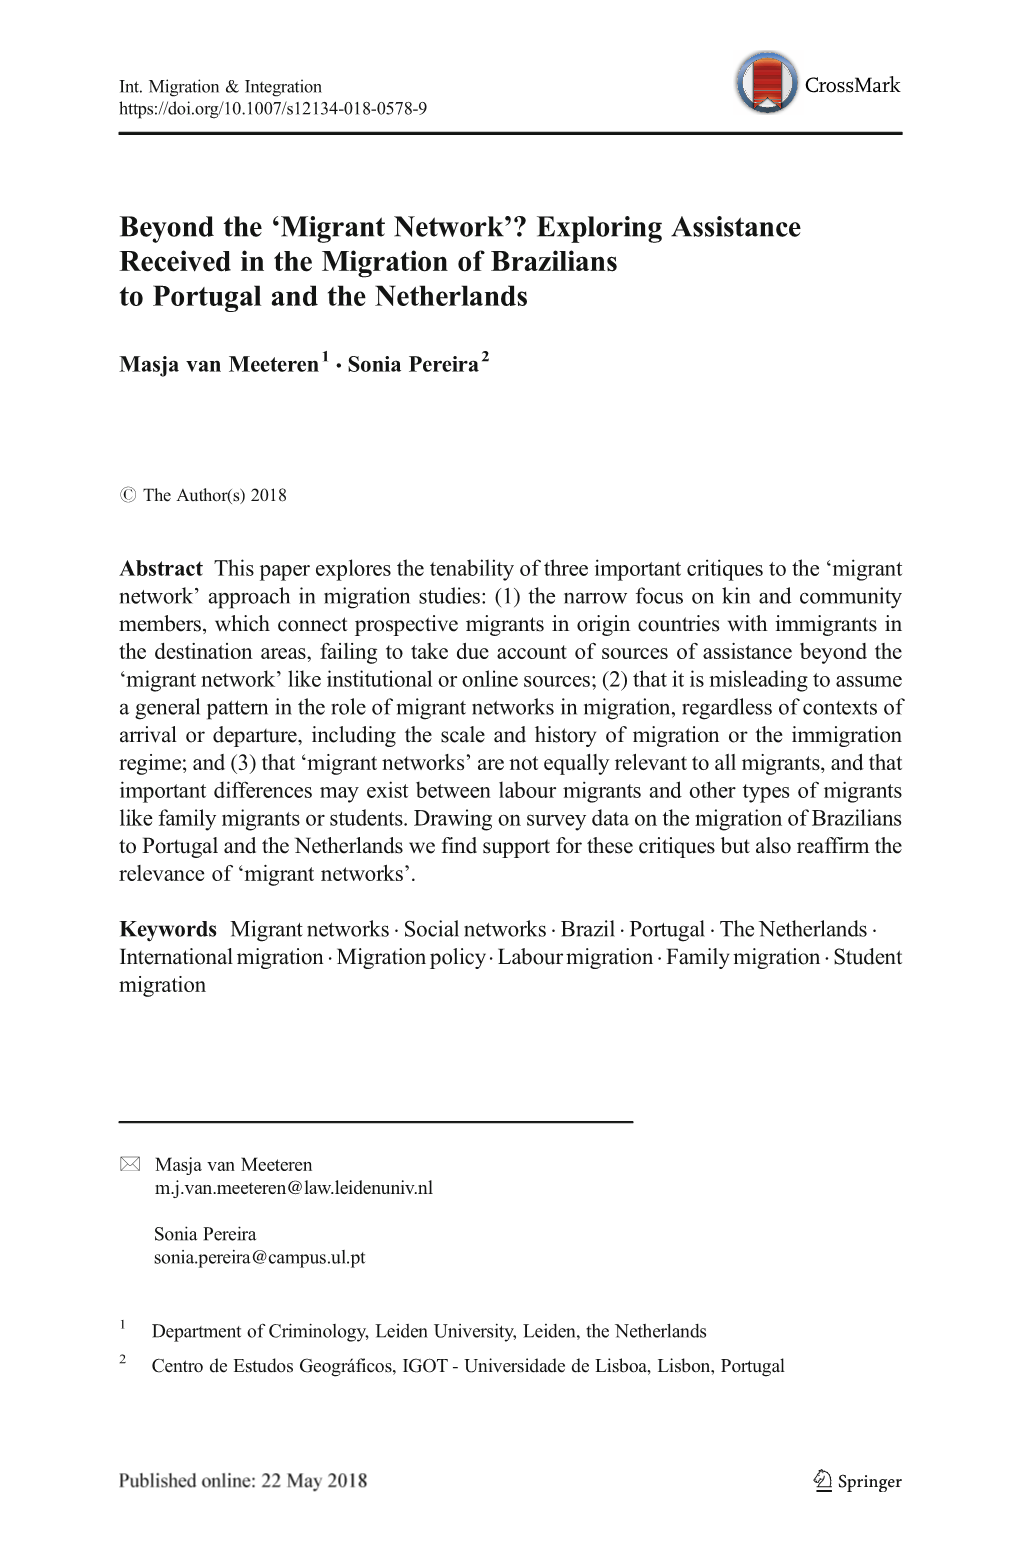 Exploring Assistance Received in the Migration of Brazilians to Portugal and the Netherlands